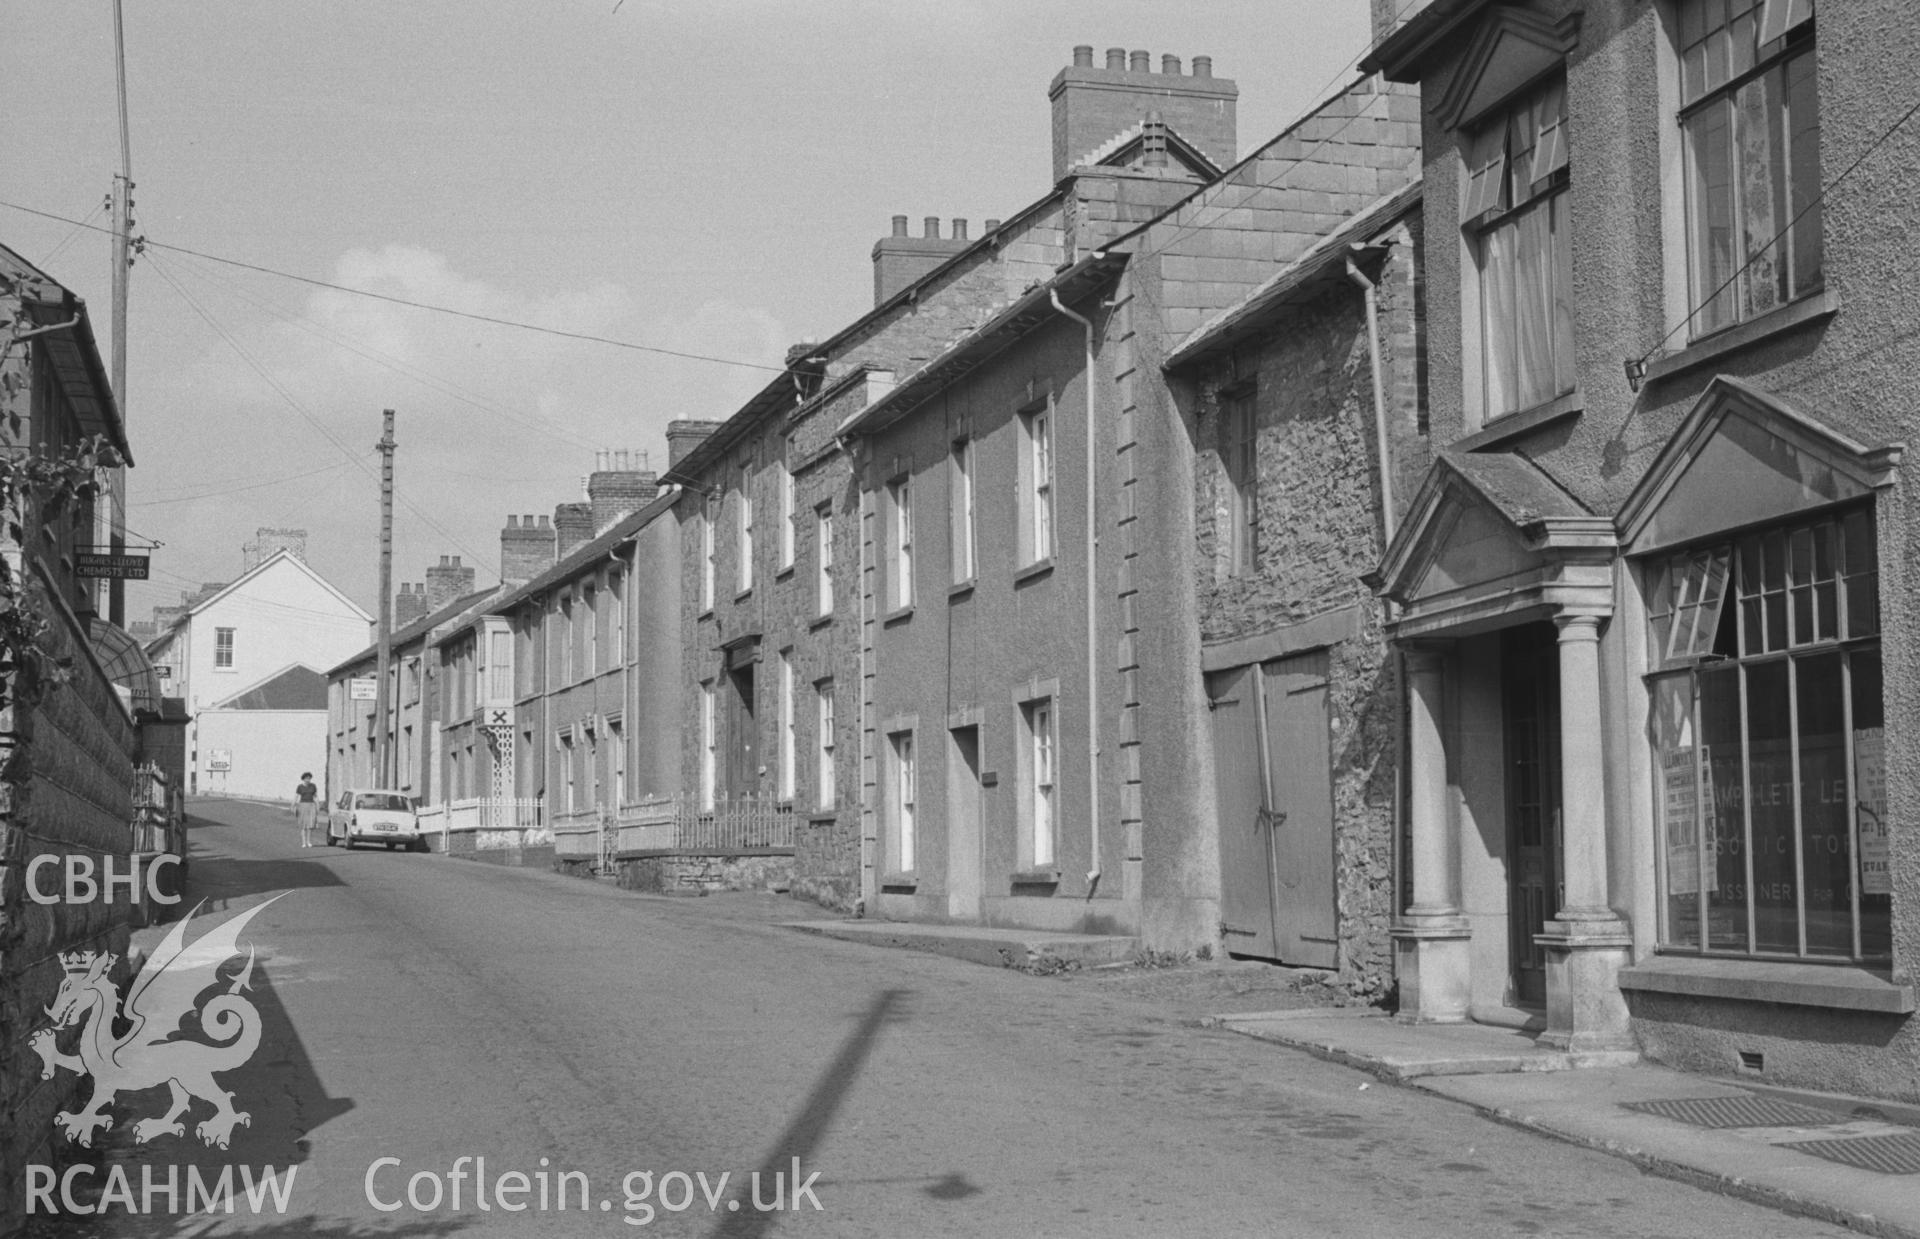 Digital copy of a black and white negative showing view of the main street to the Cilgwyn Arms Hotel in Llandysul. Photographed by Arthur O. Chater in August 1965, looking north north east.